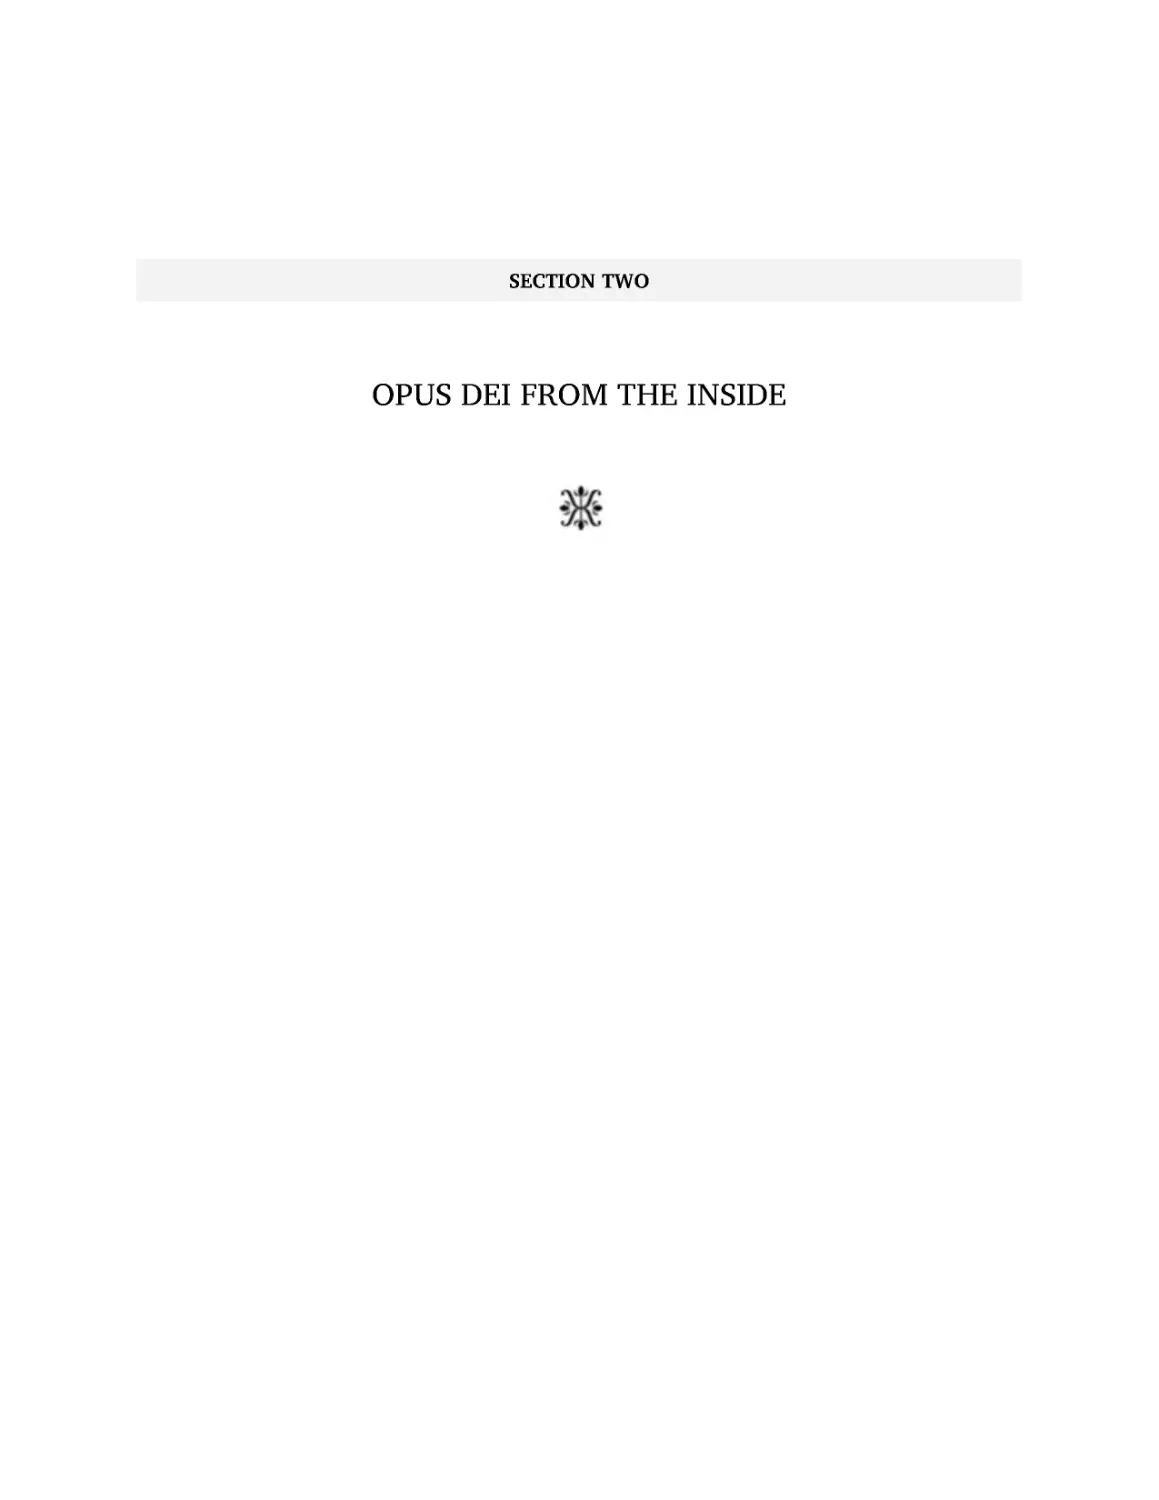 Section Two: Opus Dei from the Inside